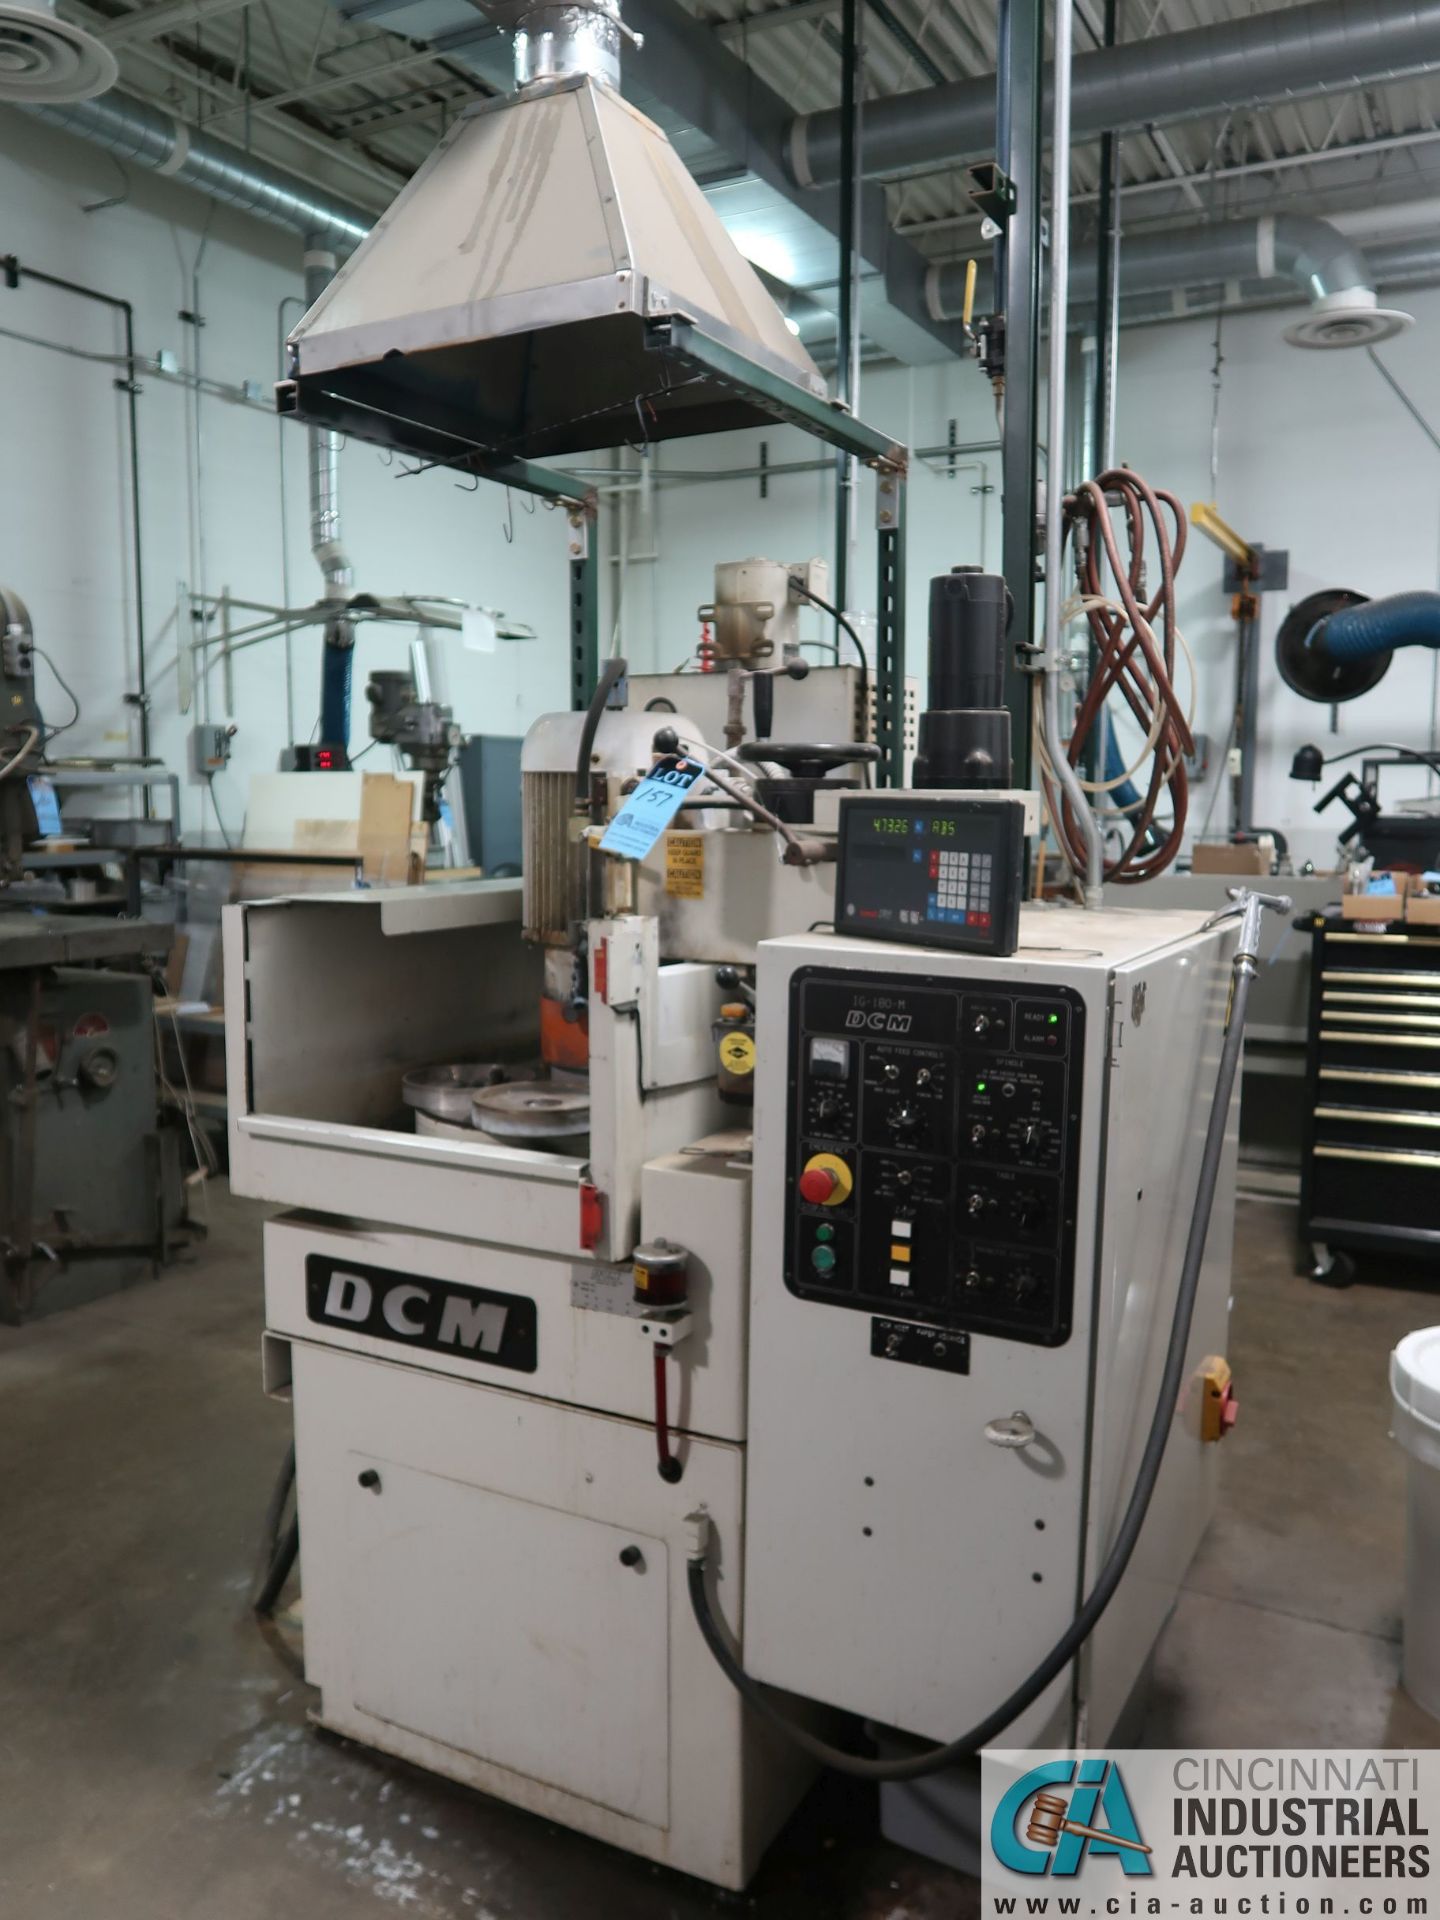 DCM TECH MODEL 1G-180 VERTICAL SPINDLE ROTARY SURFACE GRINDER; S/N 21610, 11.2 HP, 18" DIA. CHUCK, - Image 2 of 10